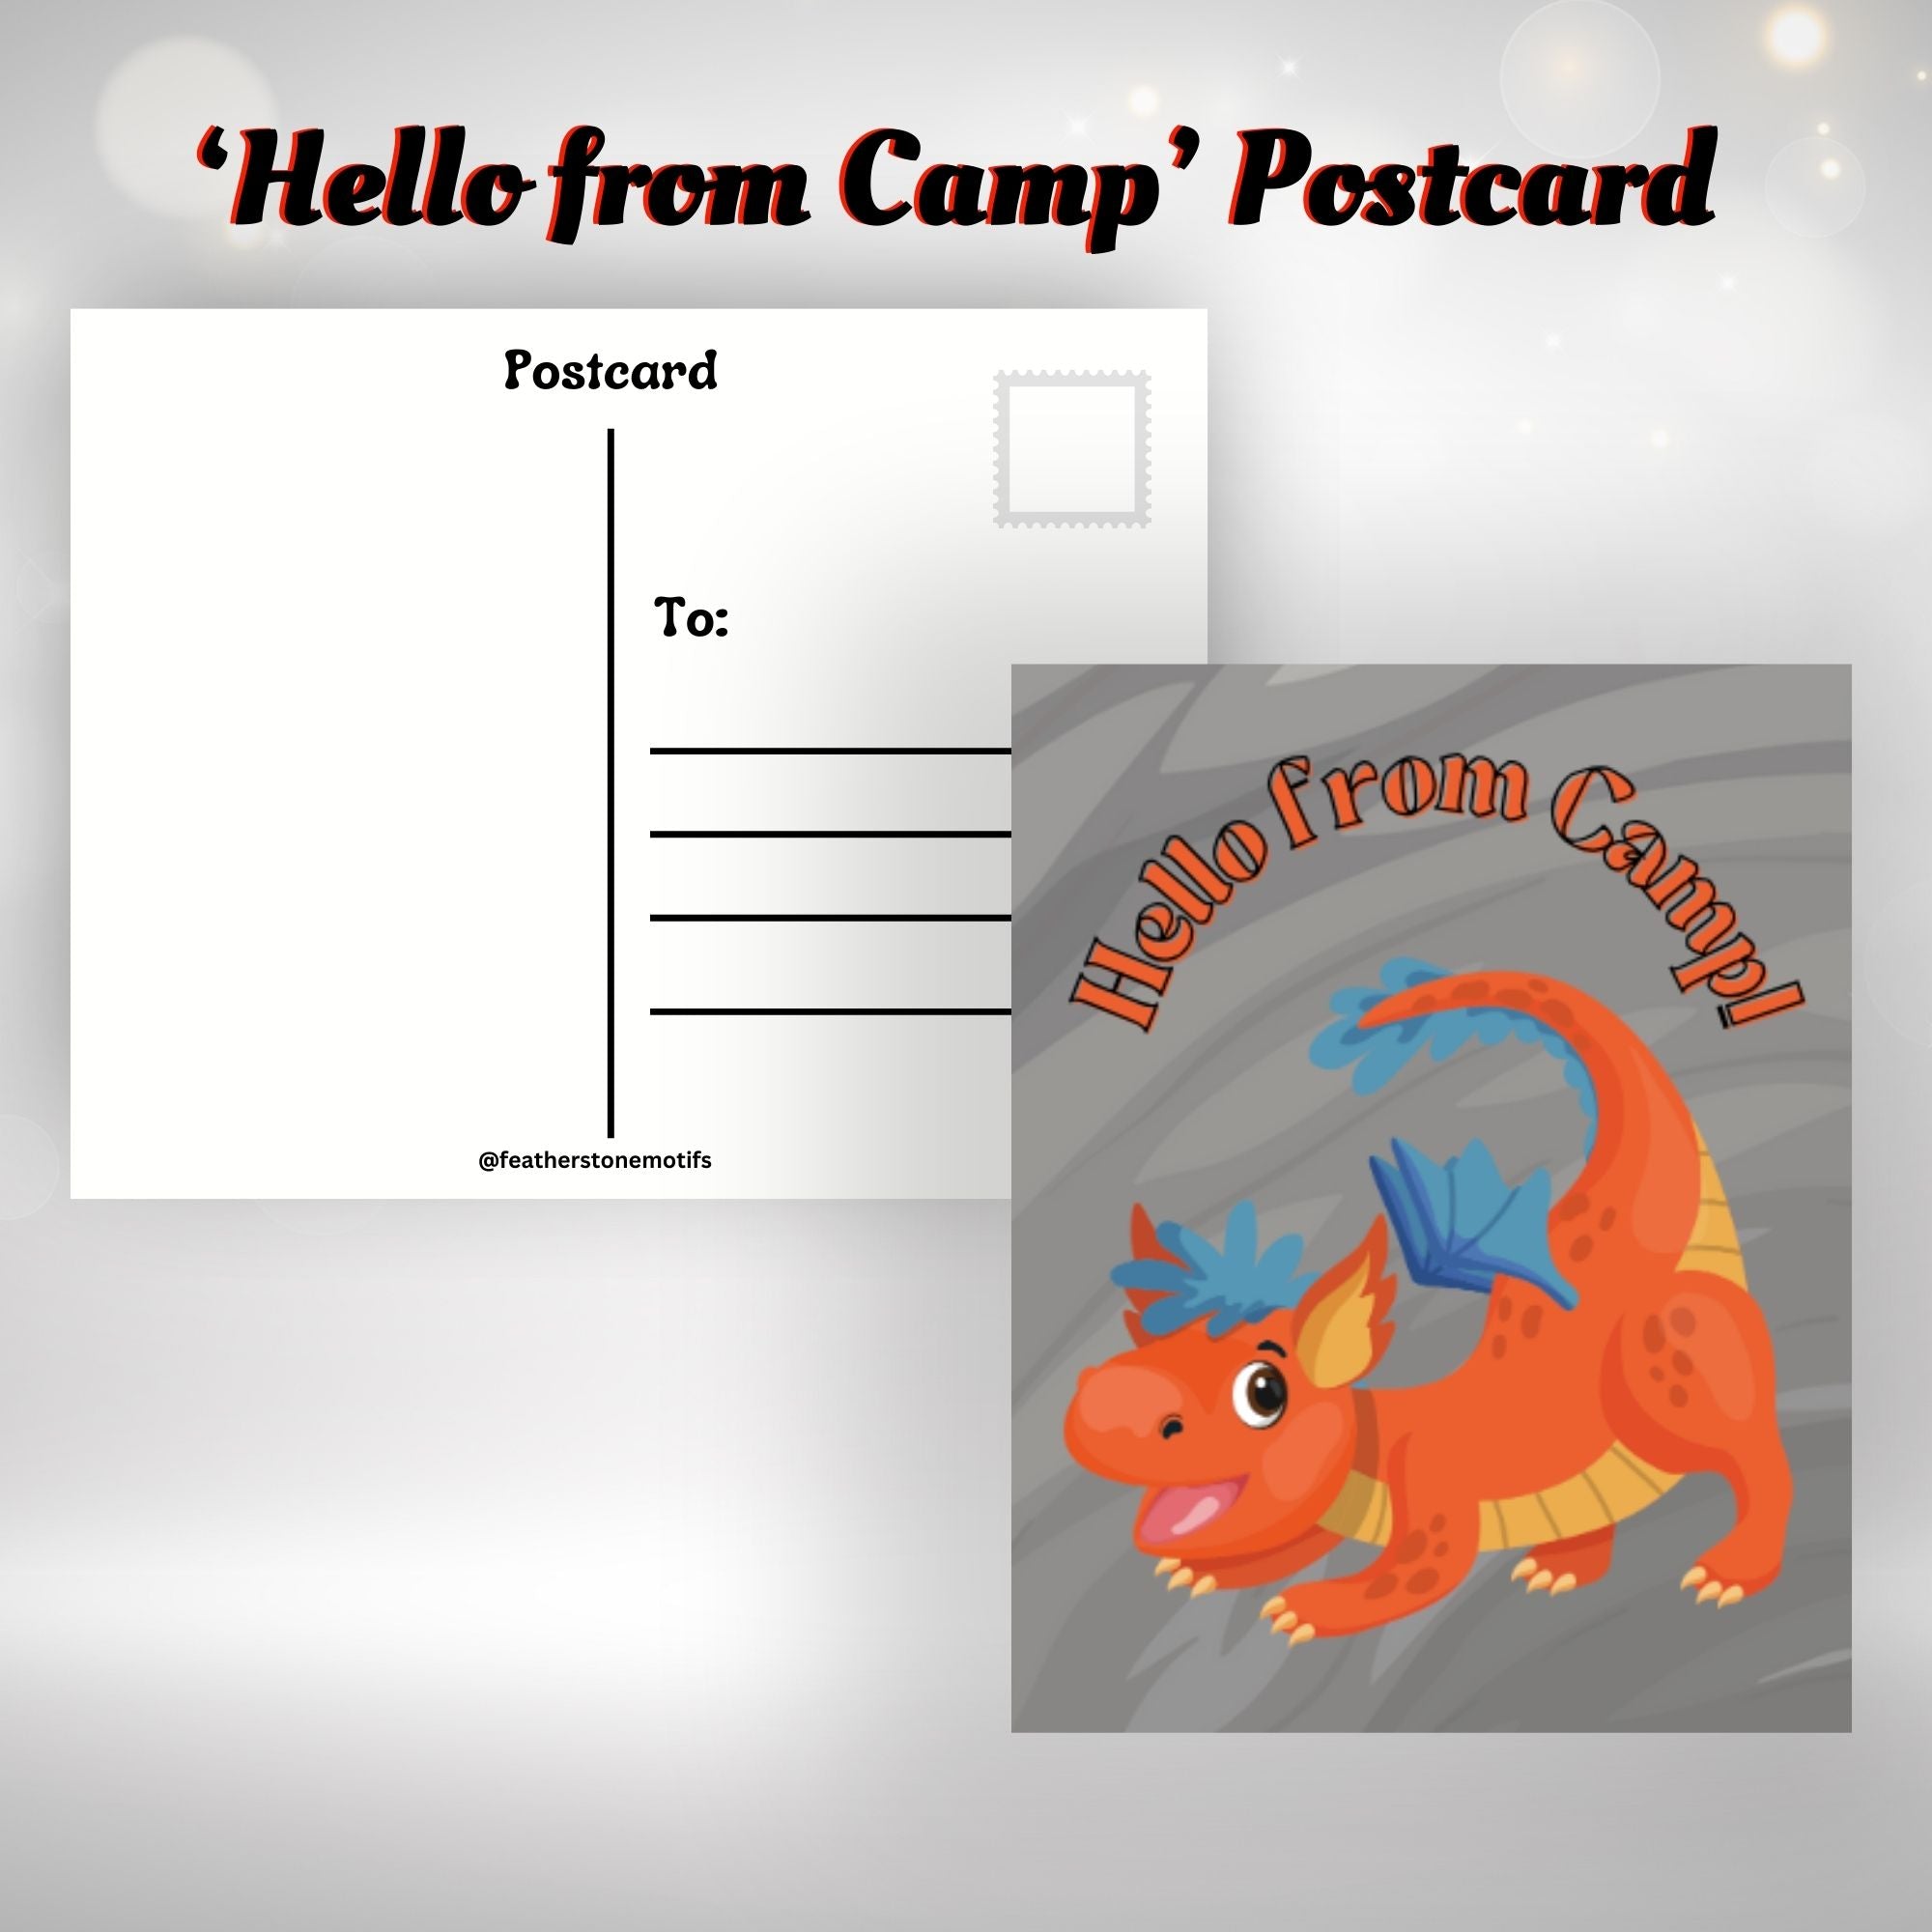 This image shows the Hello from Camp postcard with an orange and blue dragon on the front.